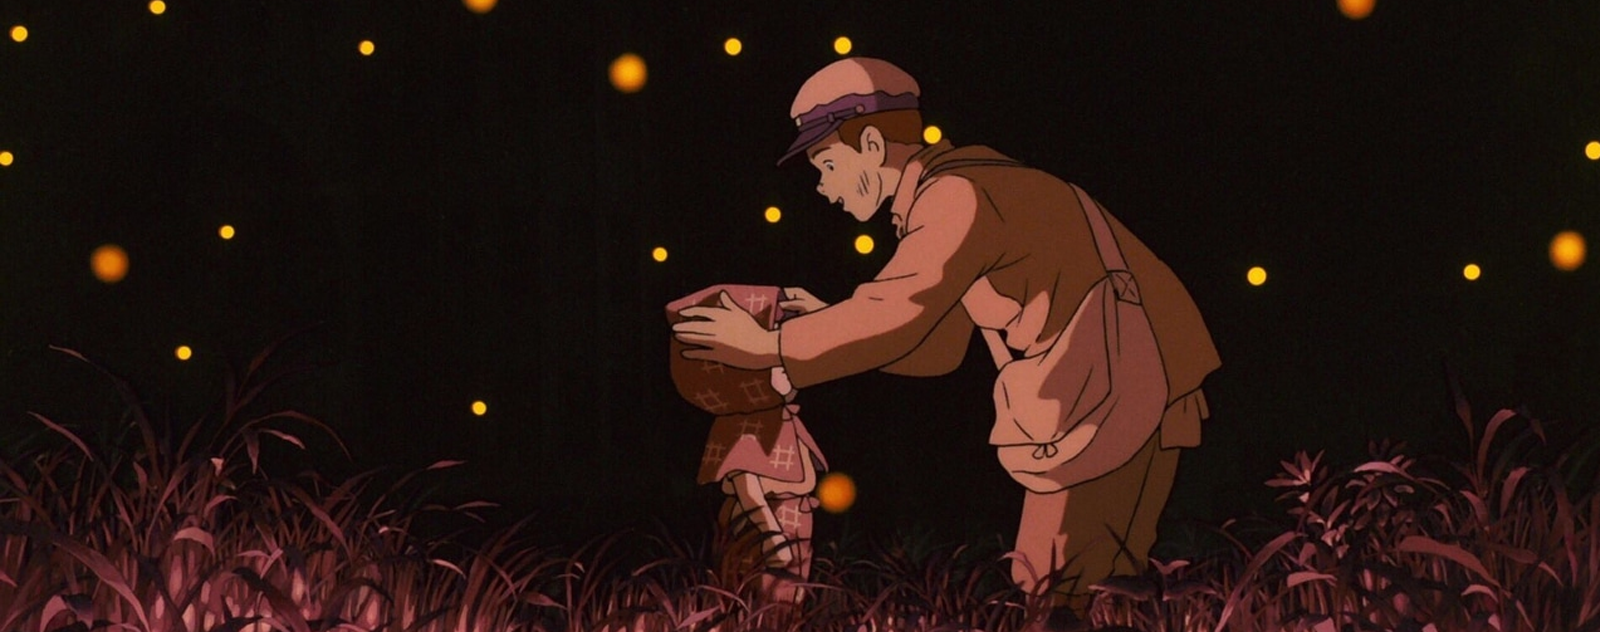 The Grave of the Fireflies